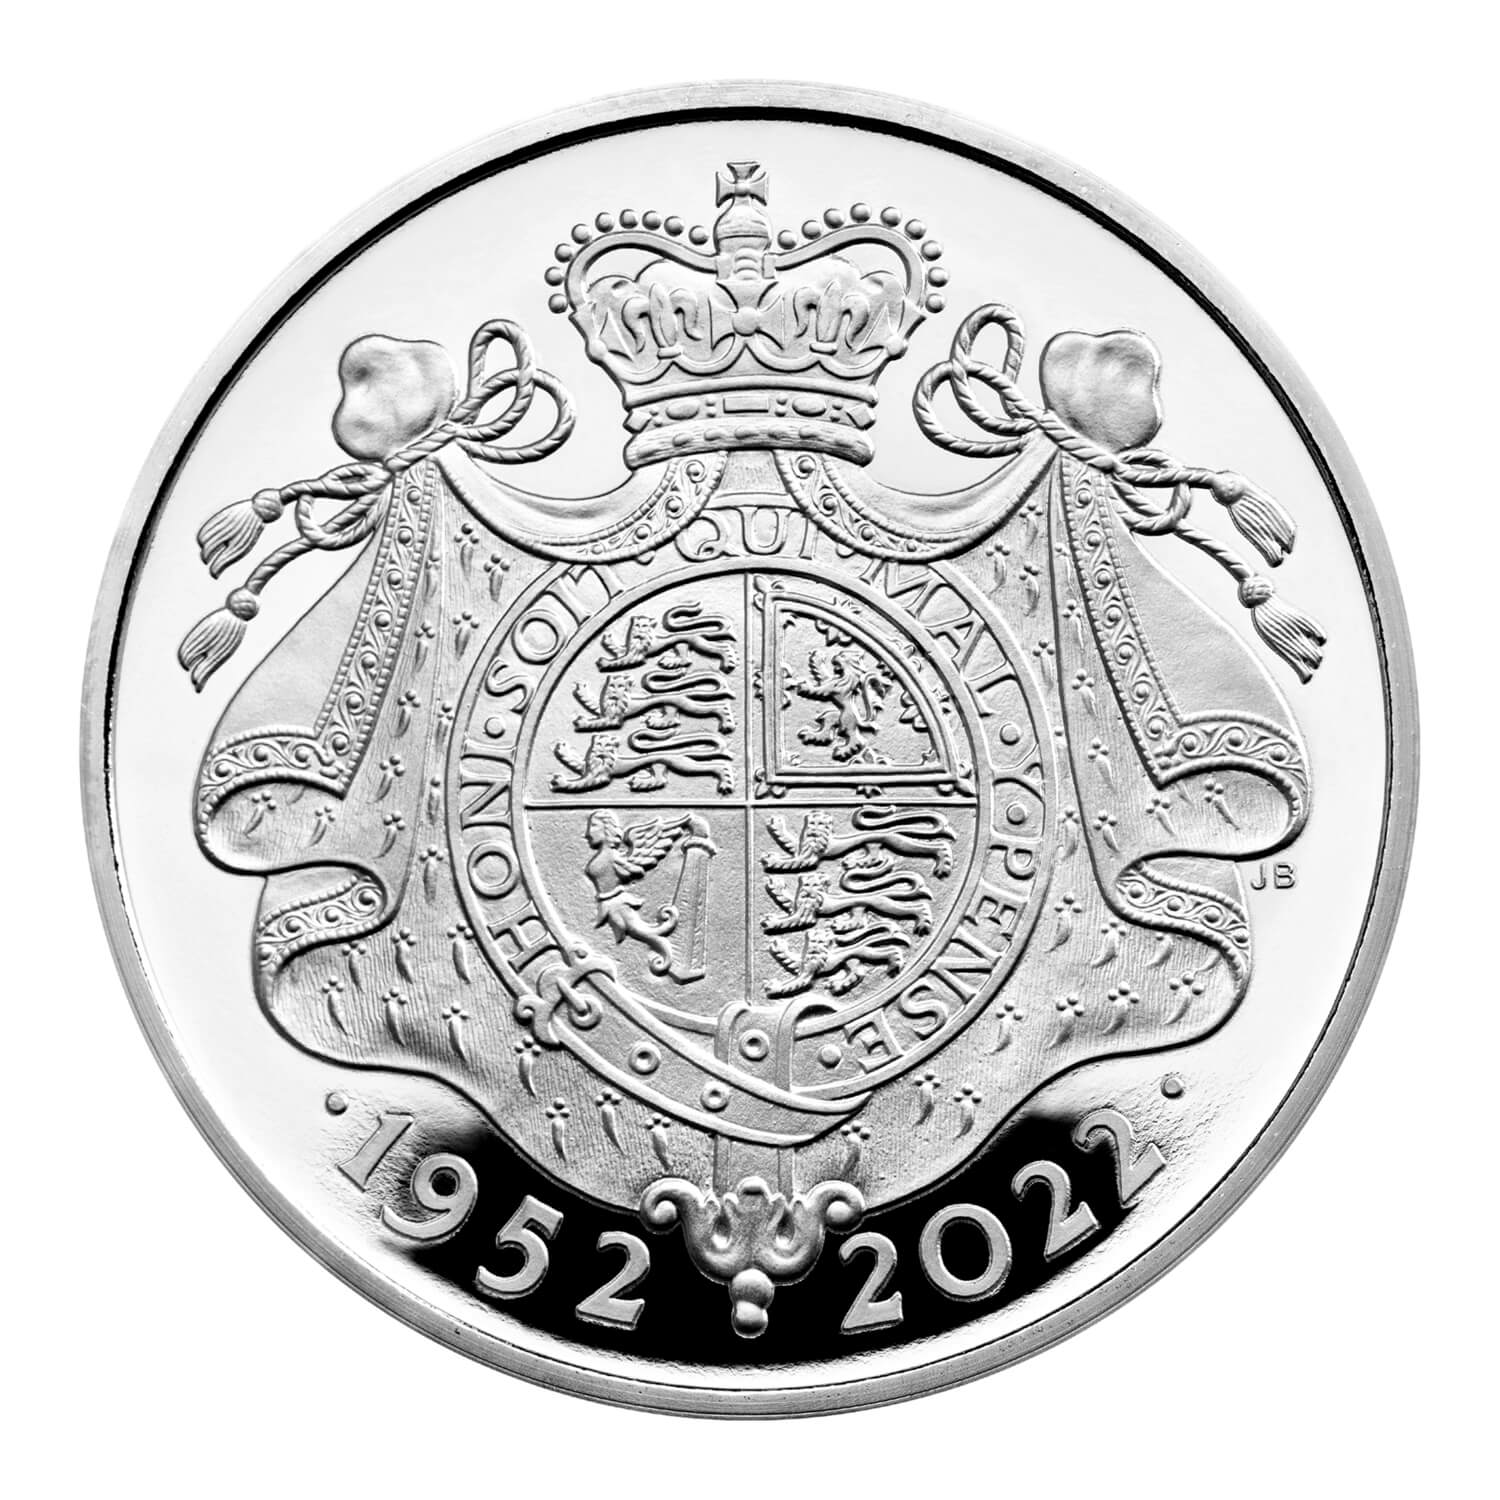 The Queen's Platinum Jubilee | The Royal Mint